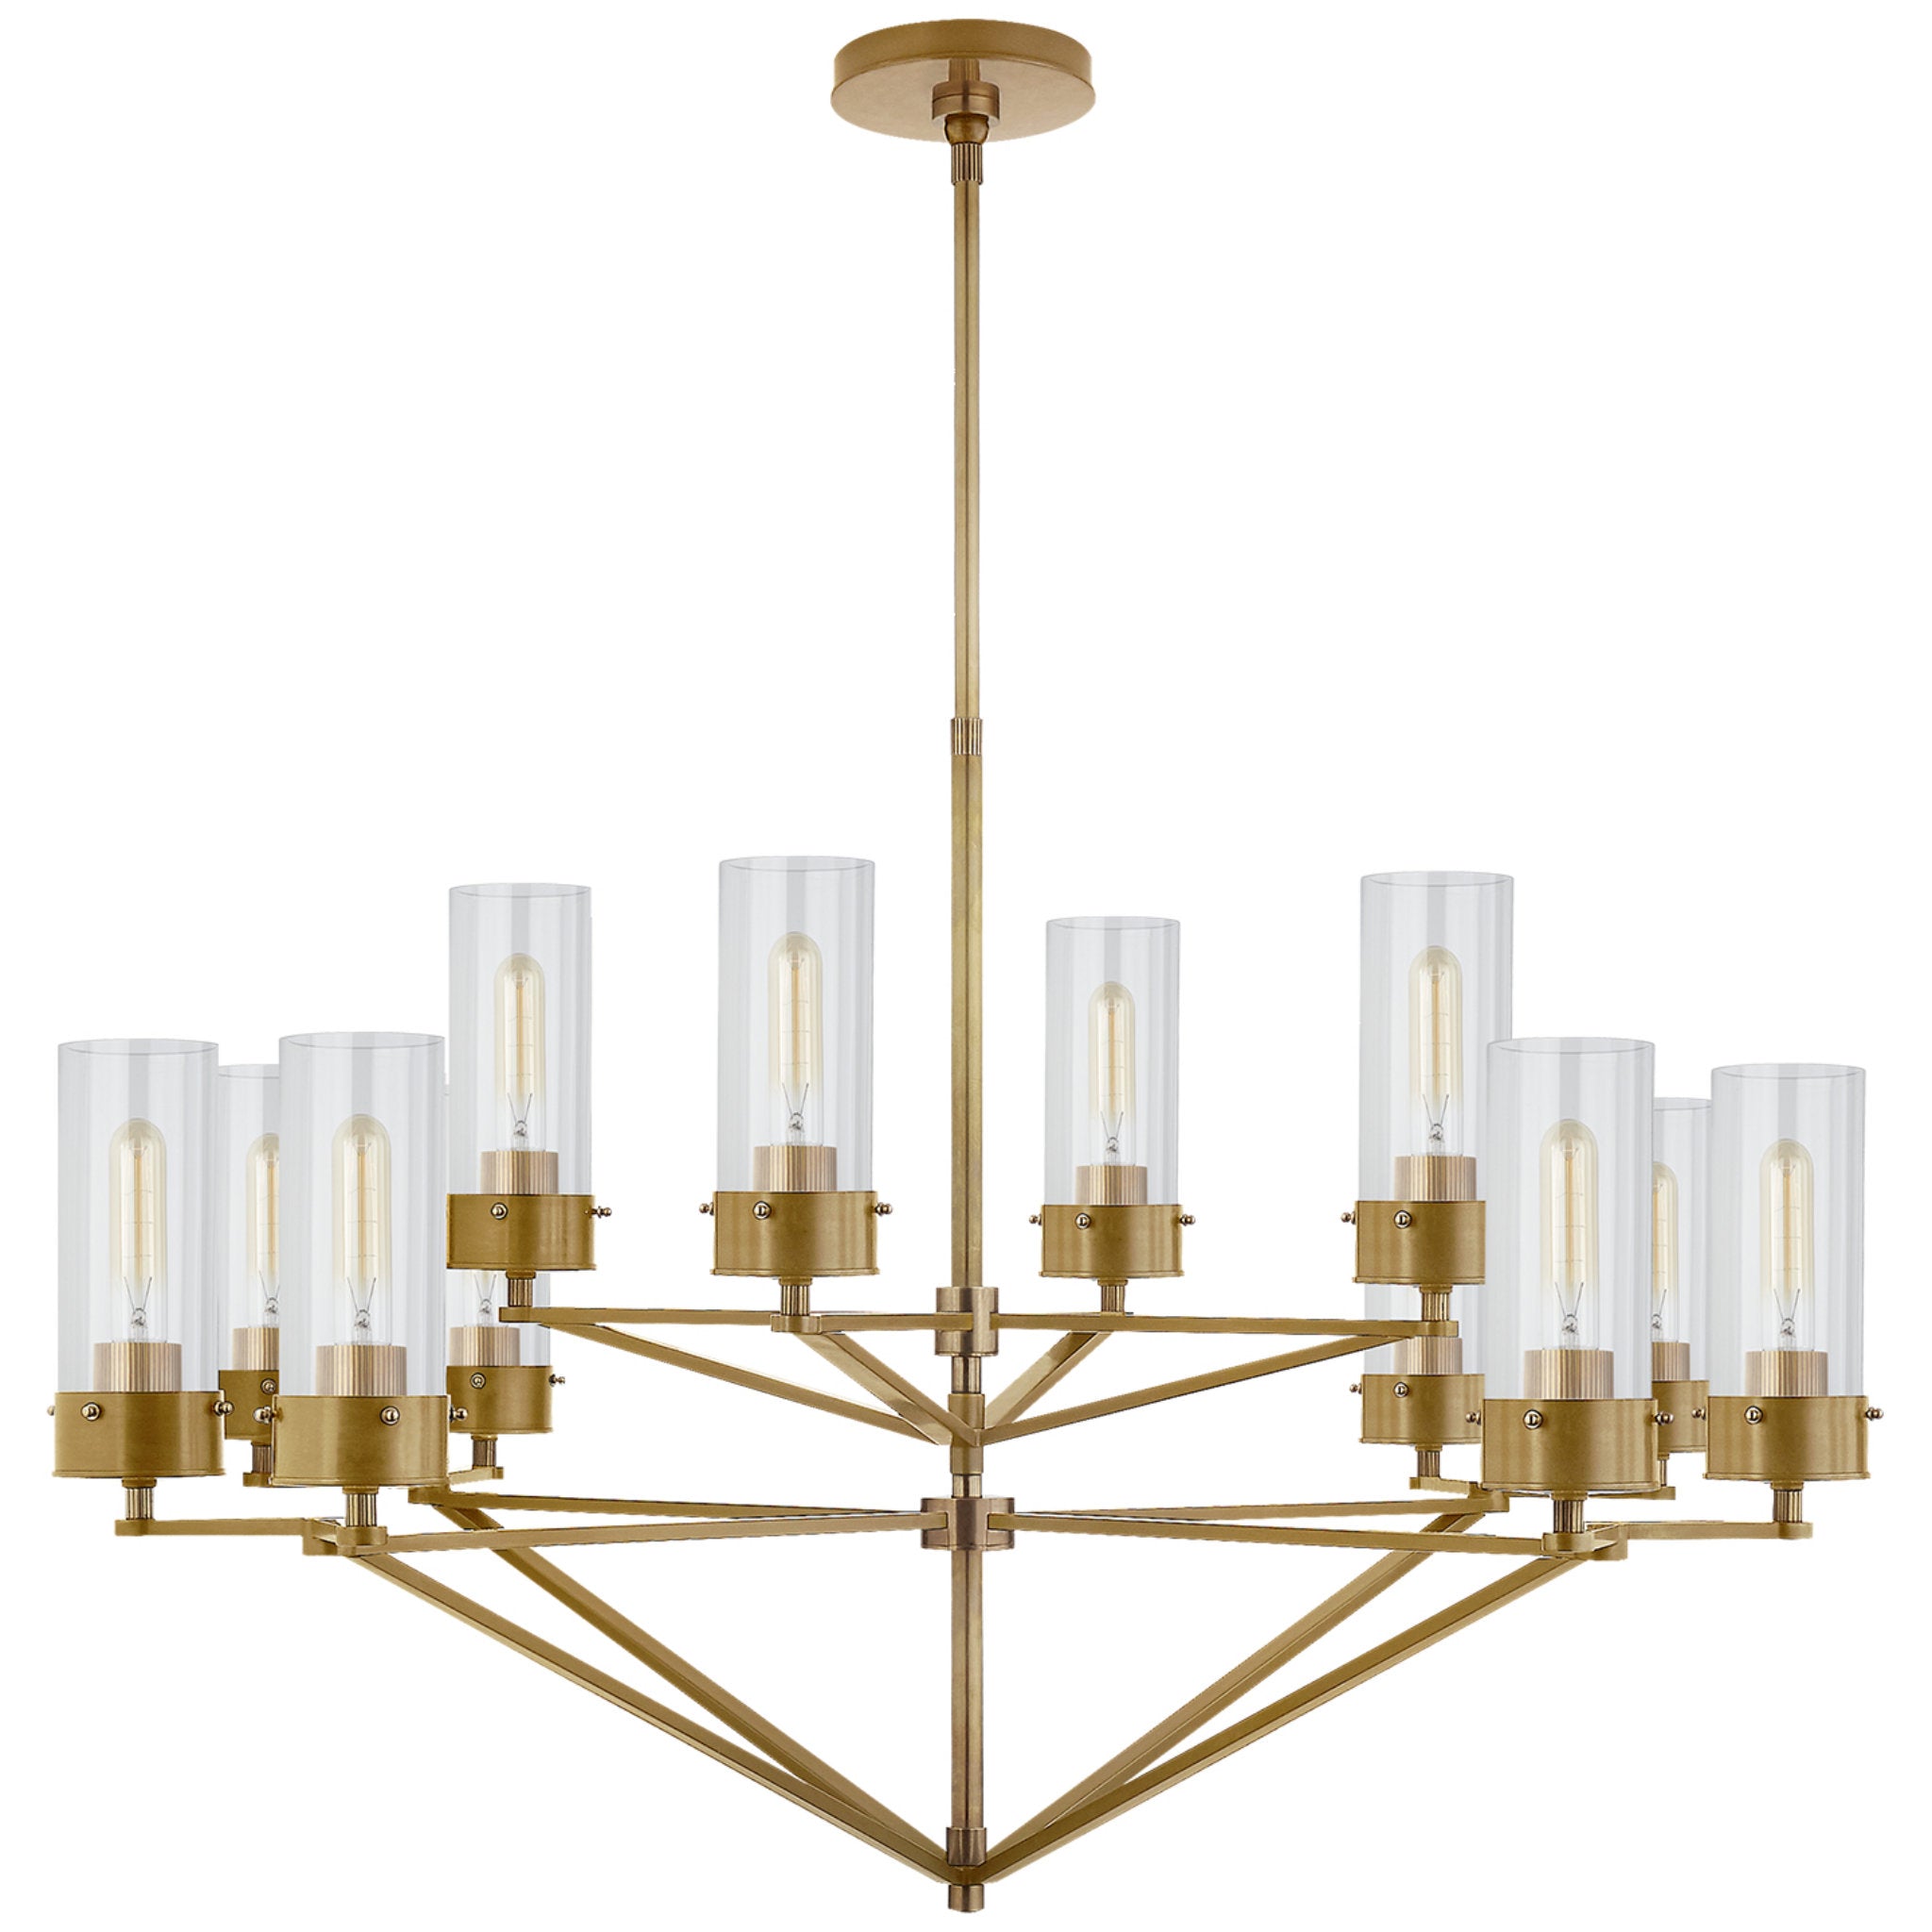 Thomas O'Brien Marais Large Chandelier in Hand-Rubbed Antique Brass with Clear Glass